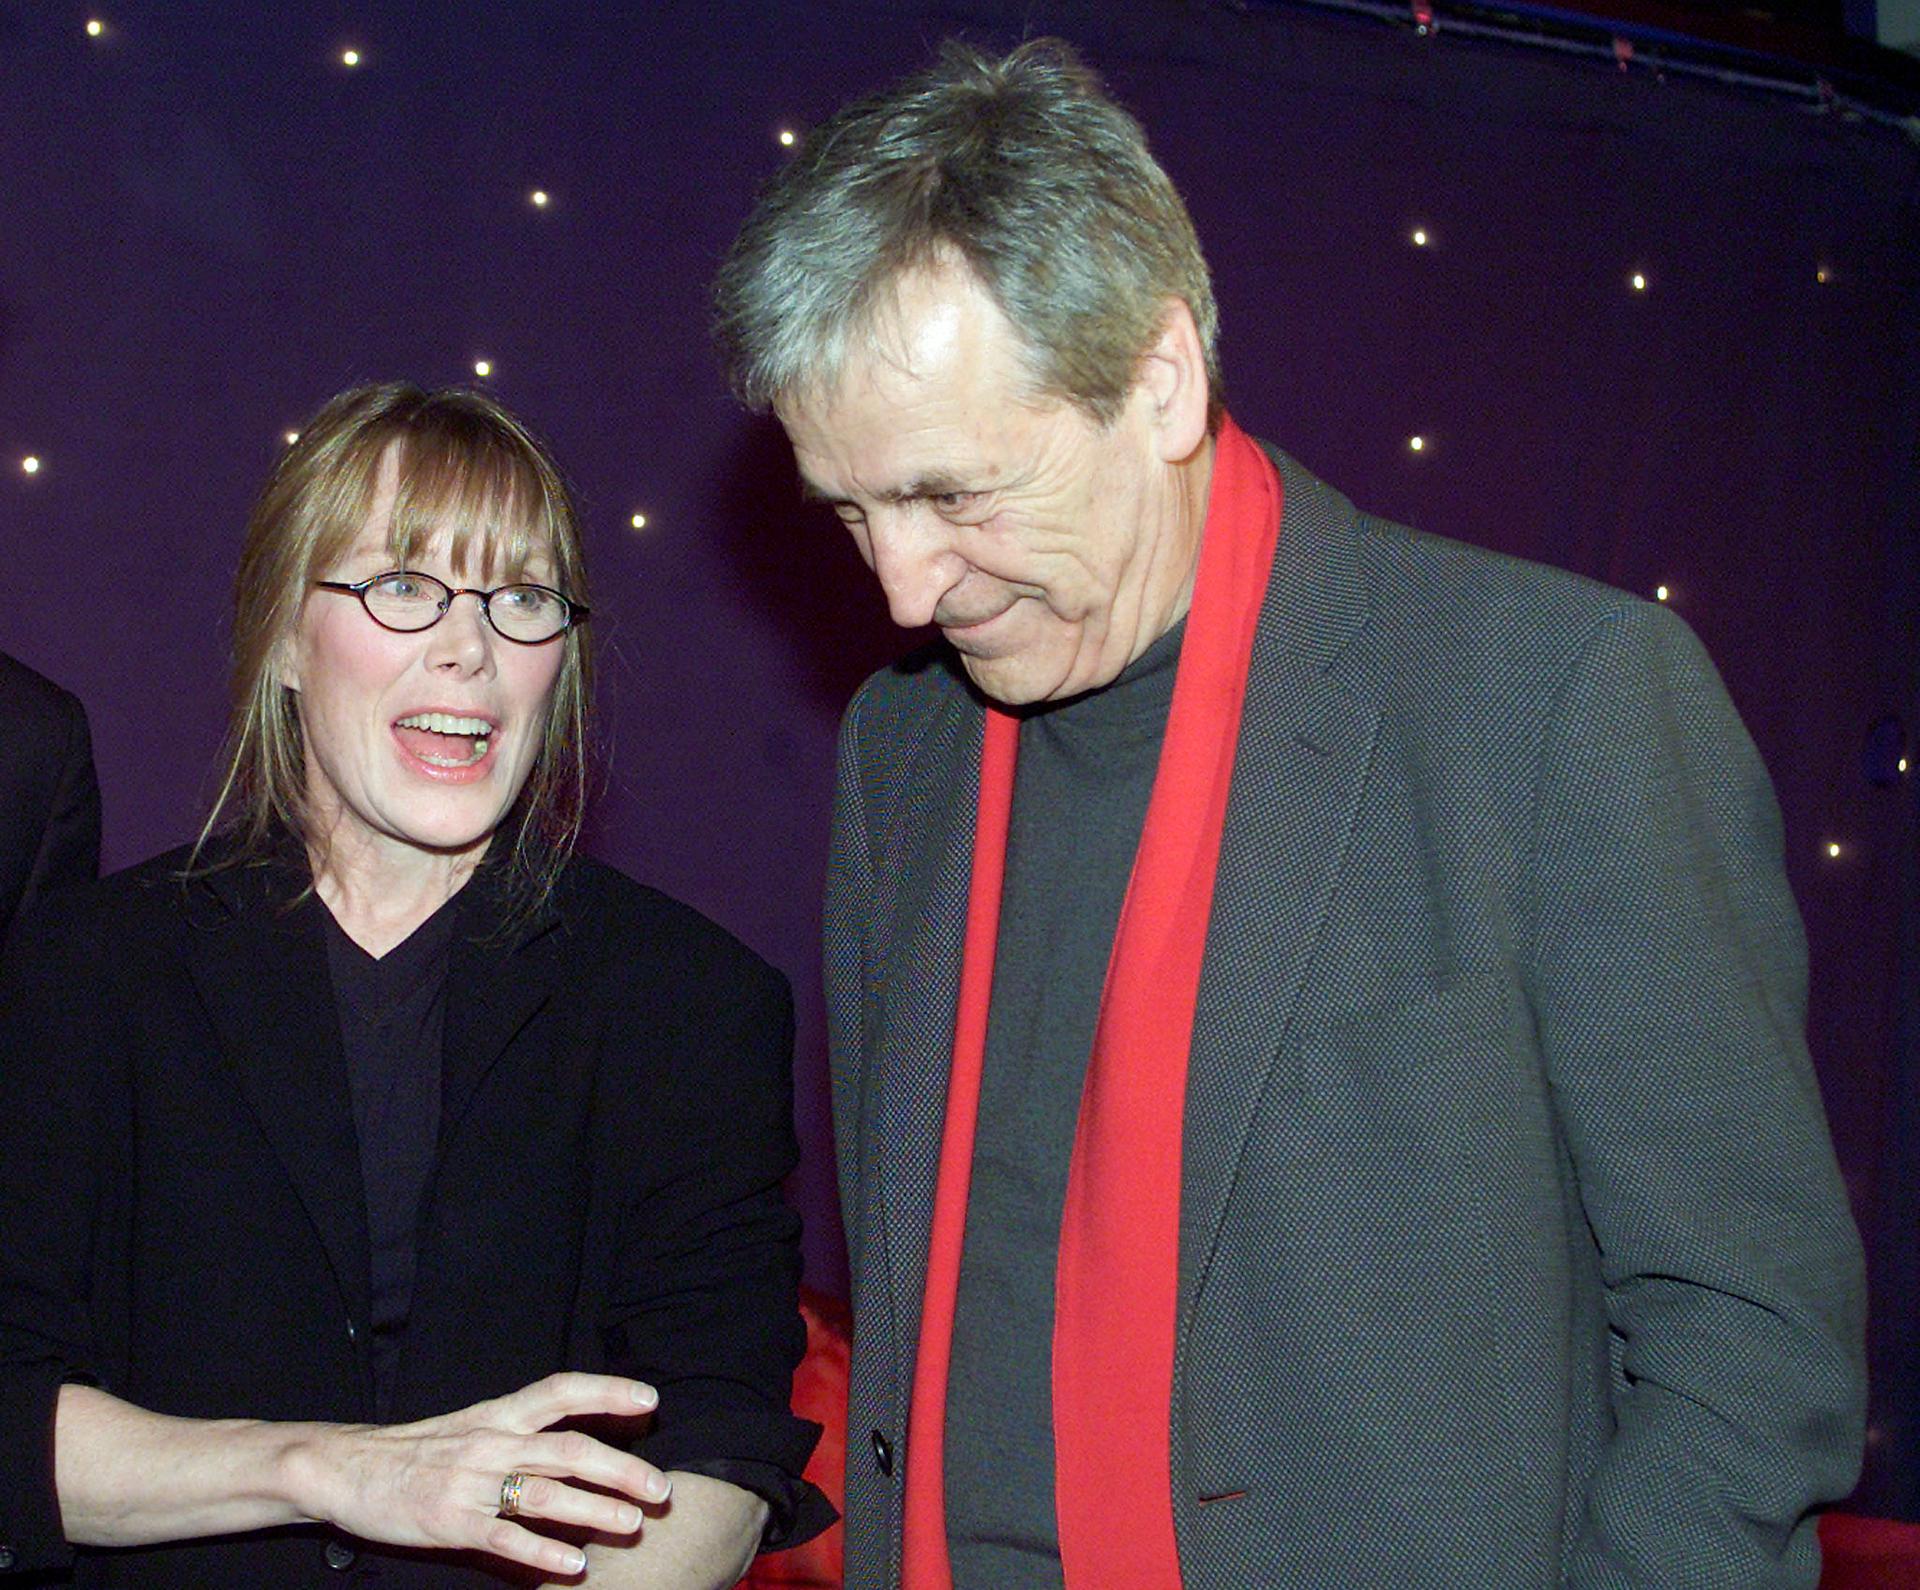 Actress Sissy Spacek and director Costa Gavras talk before the start of the Charles Horman Truth Project 2002 Human Rights Awards in New York City. Gavras directed and Spacek starred in the film "Missing."